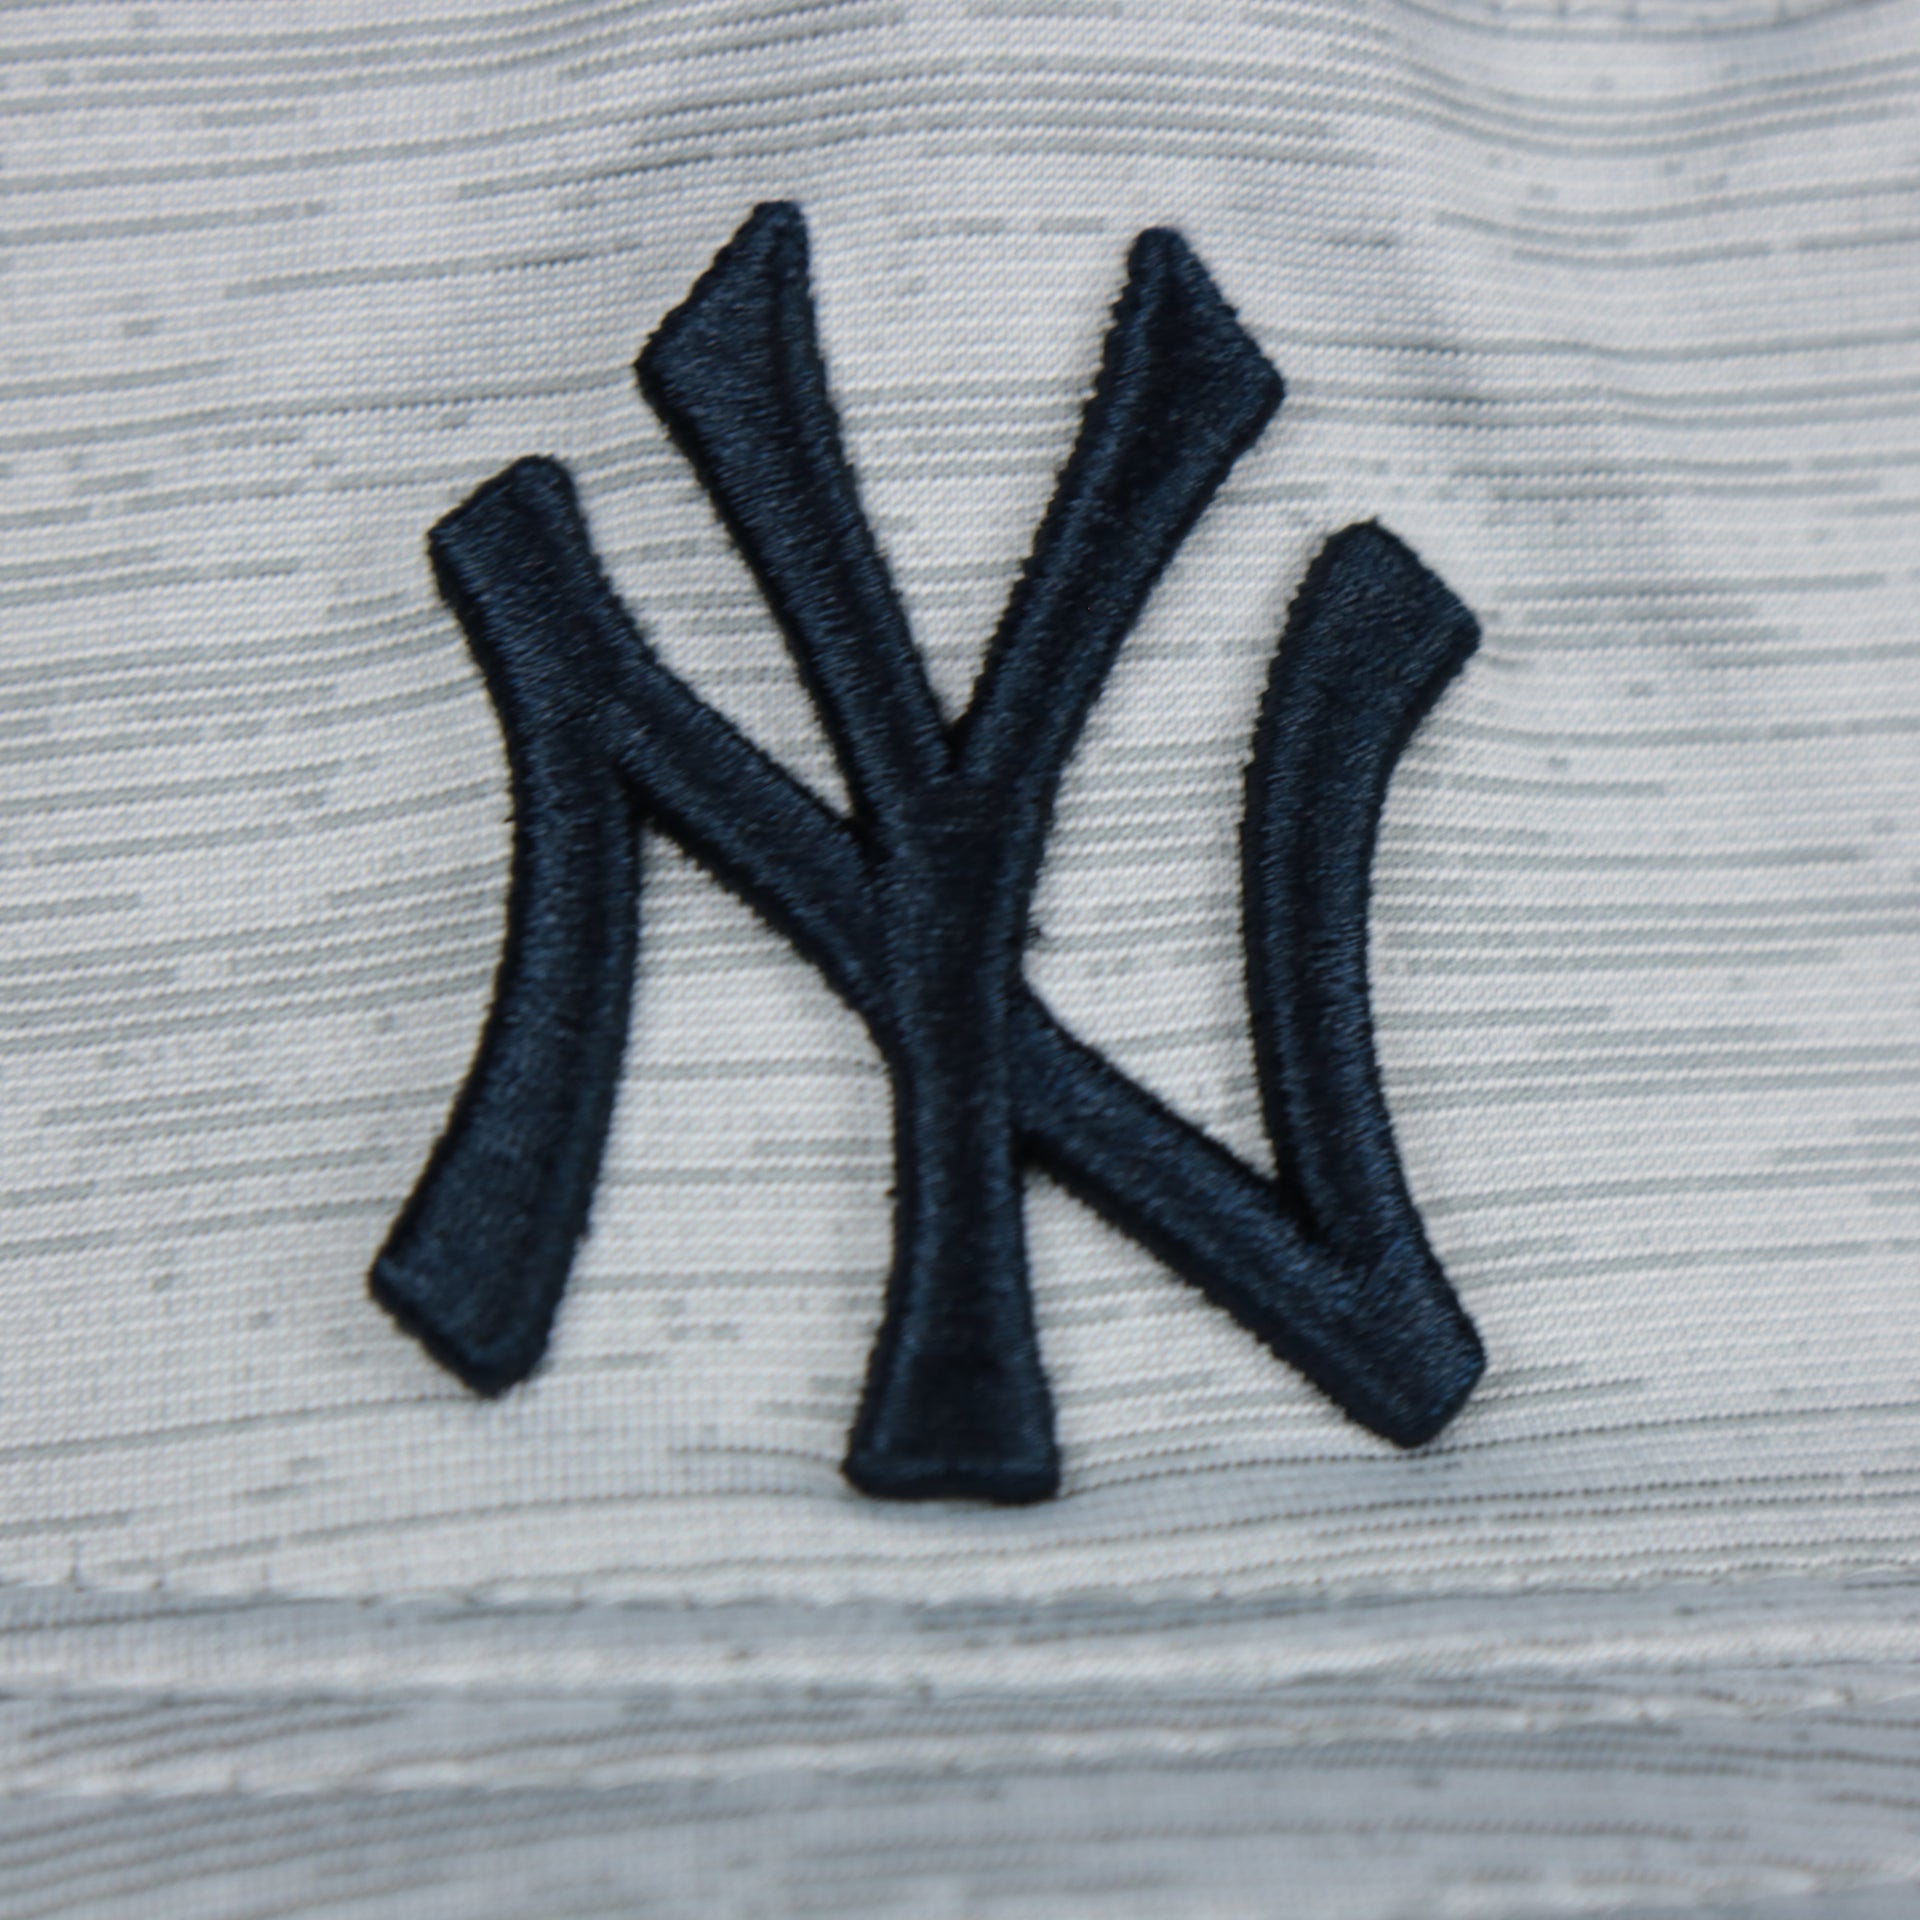 A close up of the Yankees logo on the New York Yankees New Era Bucket Hat